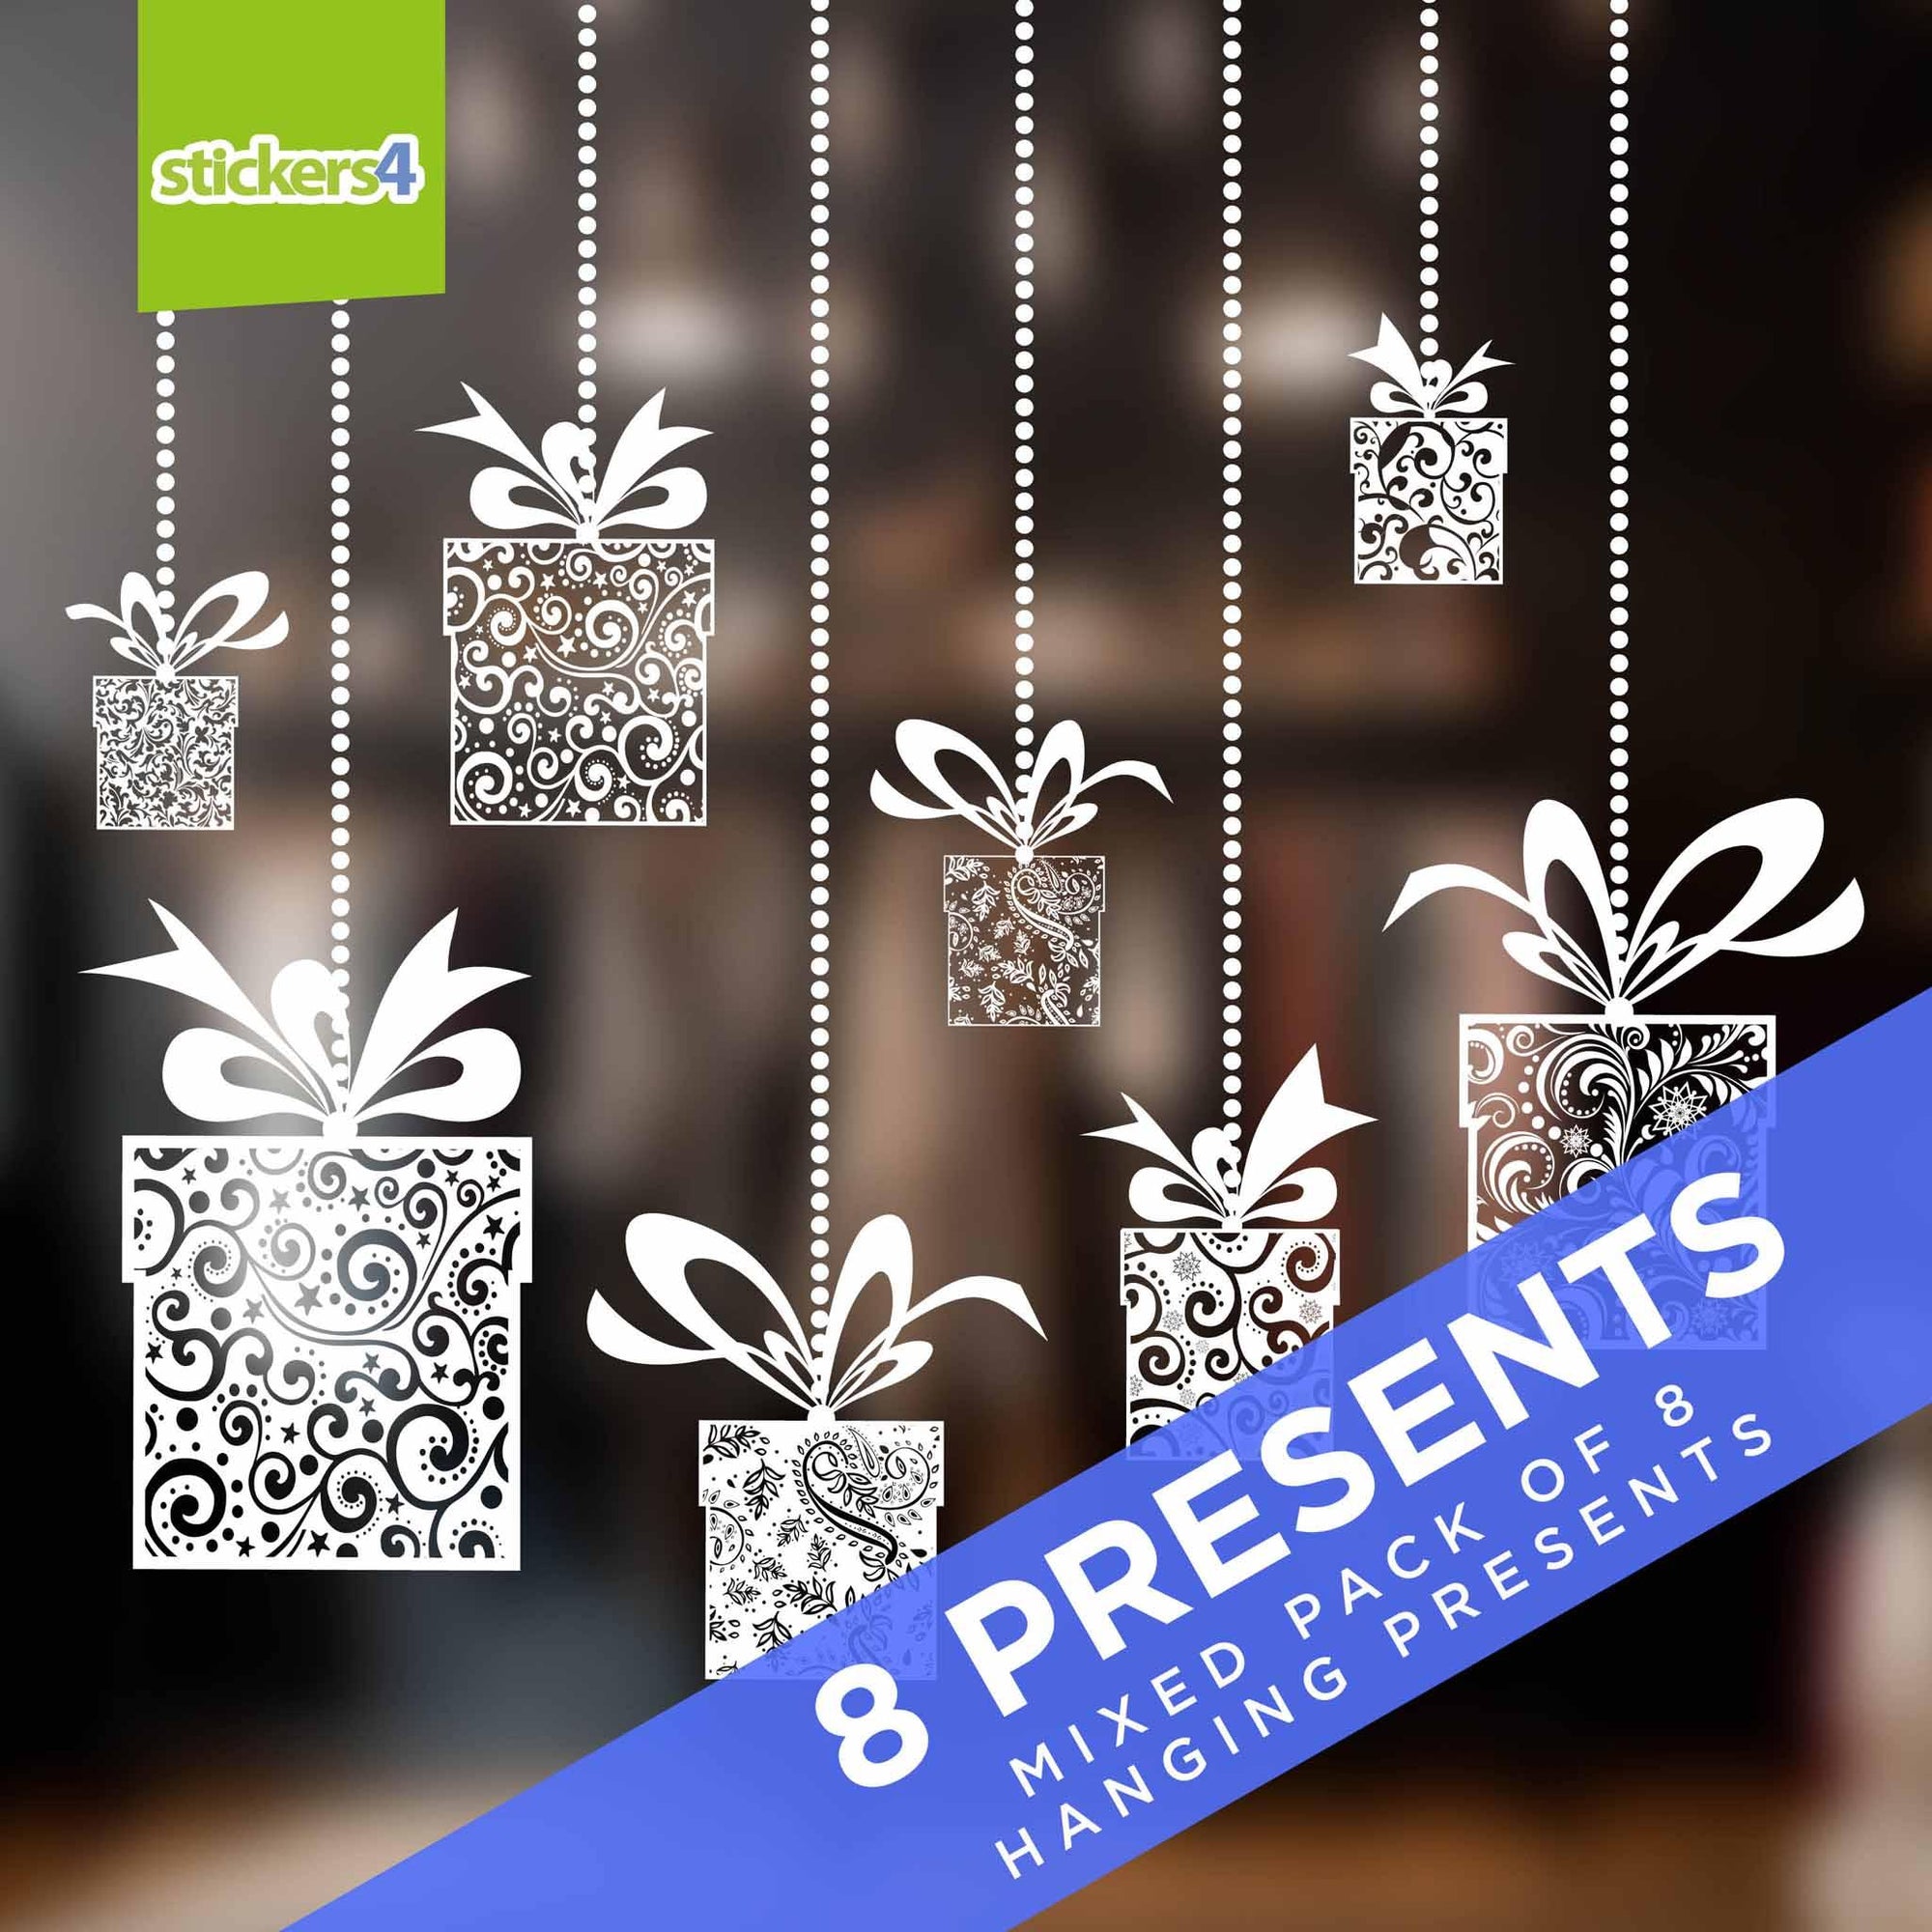 Classic Hanging Presents - Pack of 8 Christmas Window Display